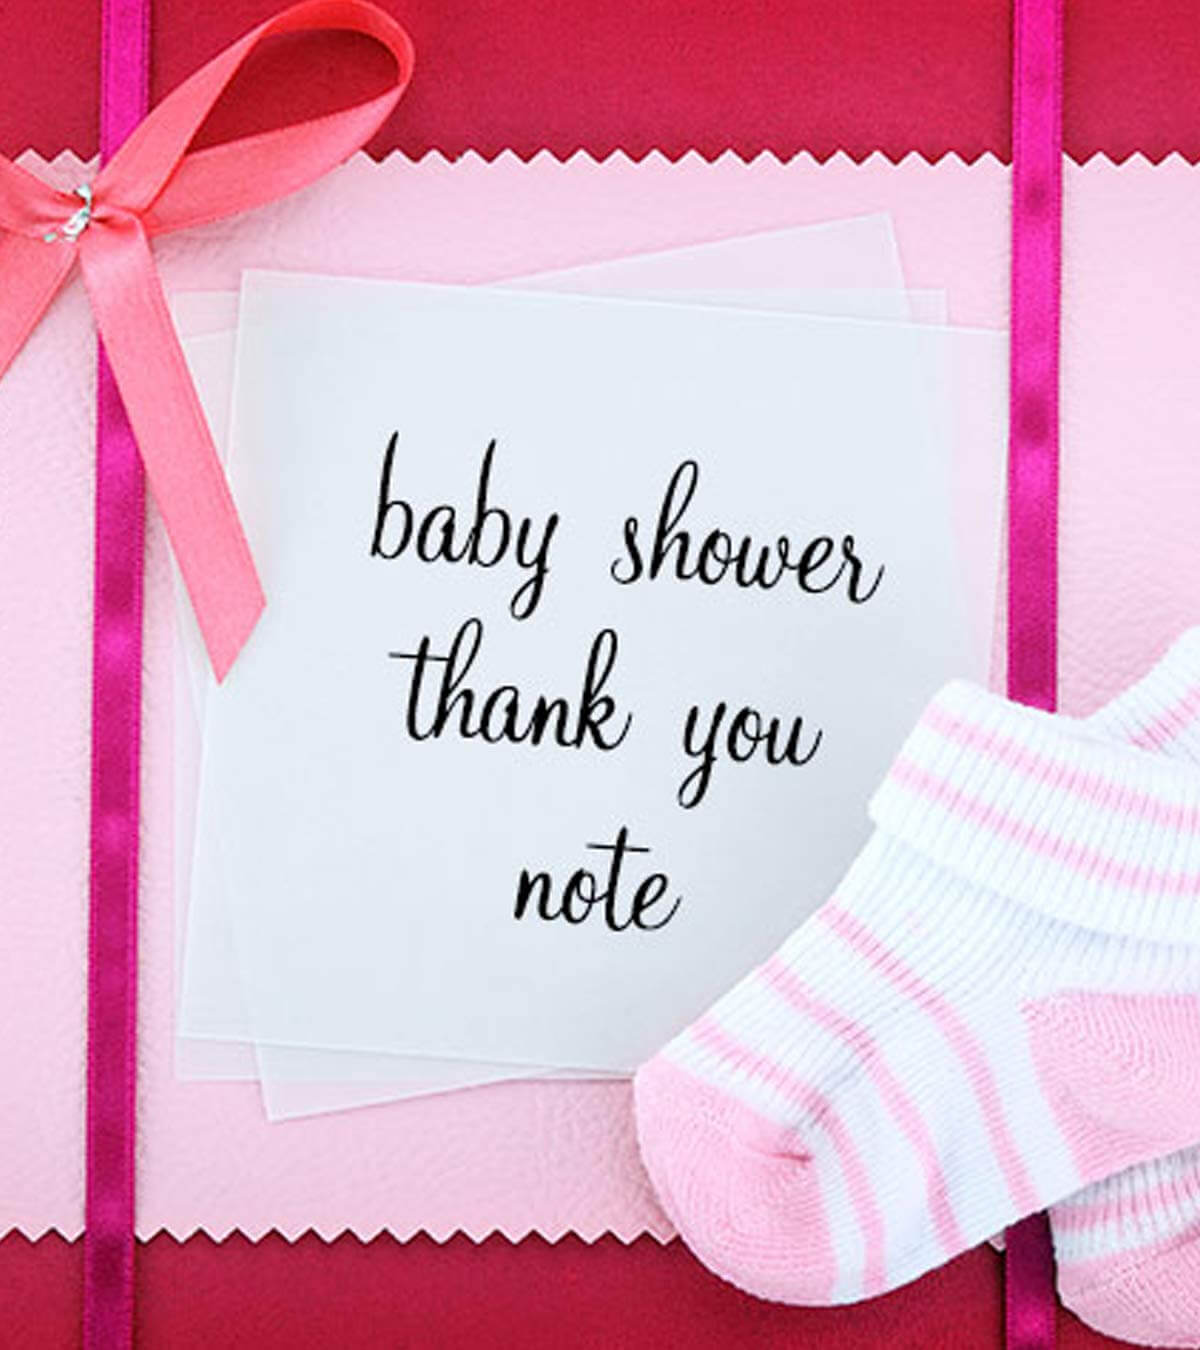 Baby Shower Thank You Notes: What To Write In A Thank You Card Pertaining To Template For Baby Shower Thank You Cards